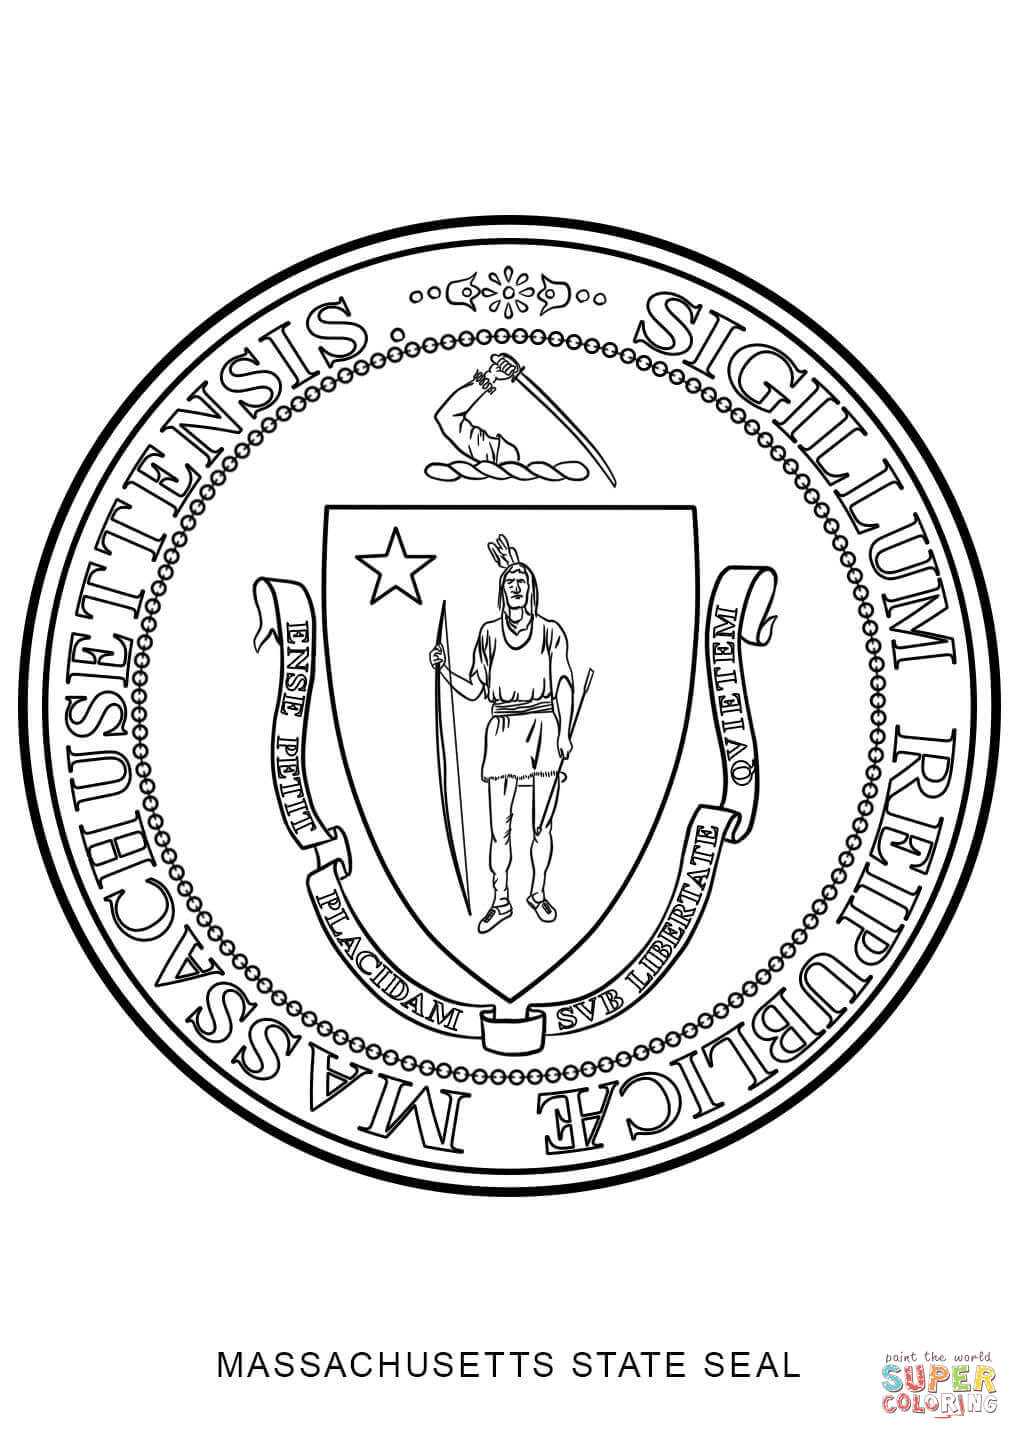 Massachusetts State Seal Coloring Page